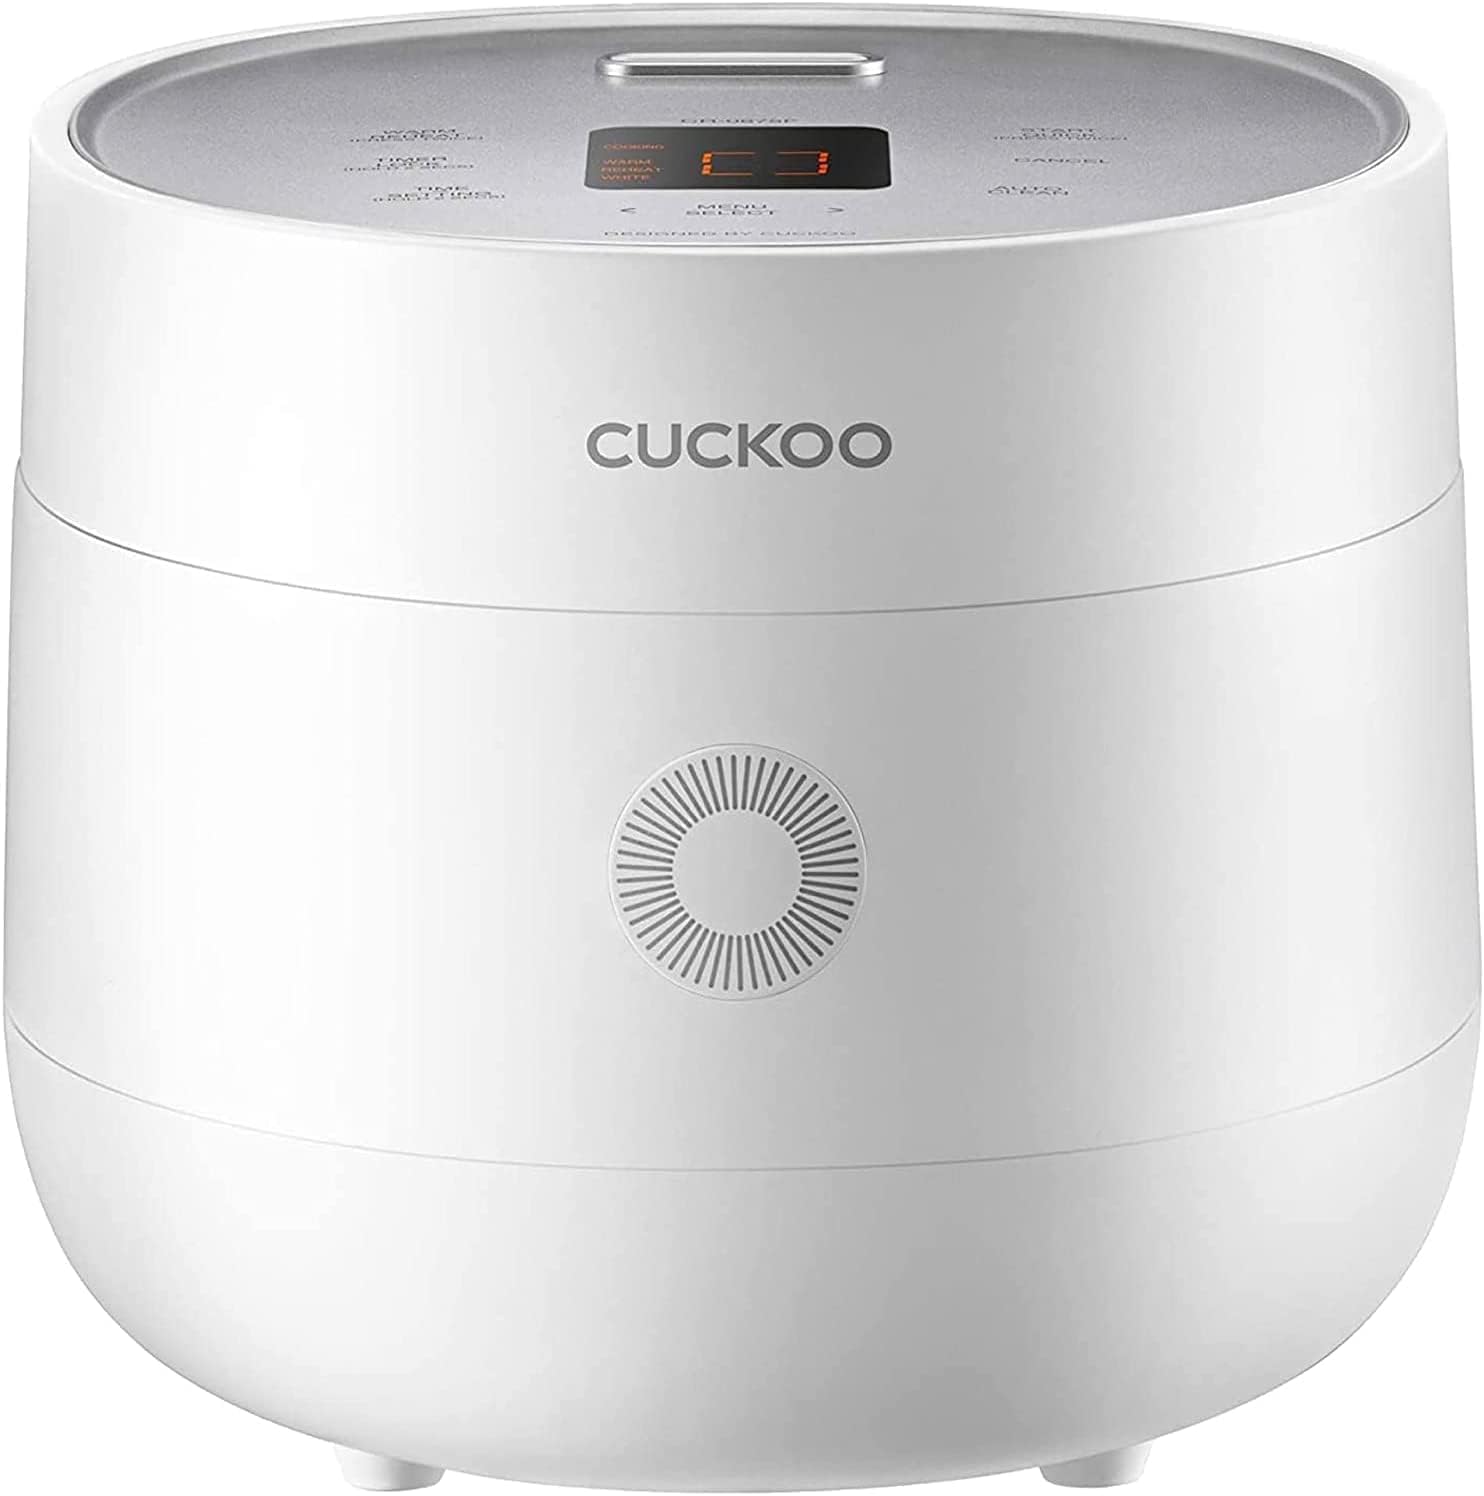 CUCKOO 6-Cup (Uncooked) Micom Rice Cooker Nonstick Inner Pot | White